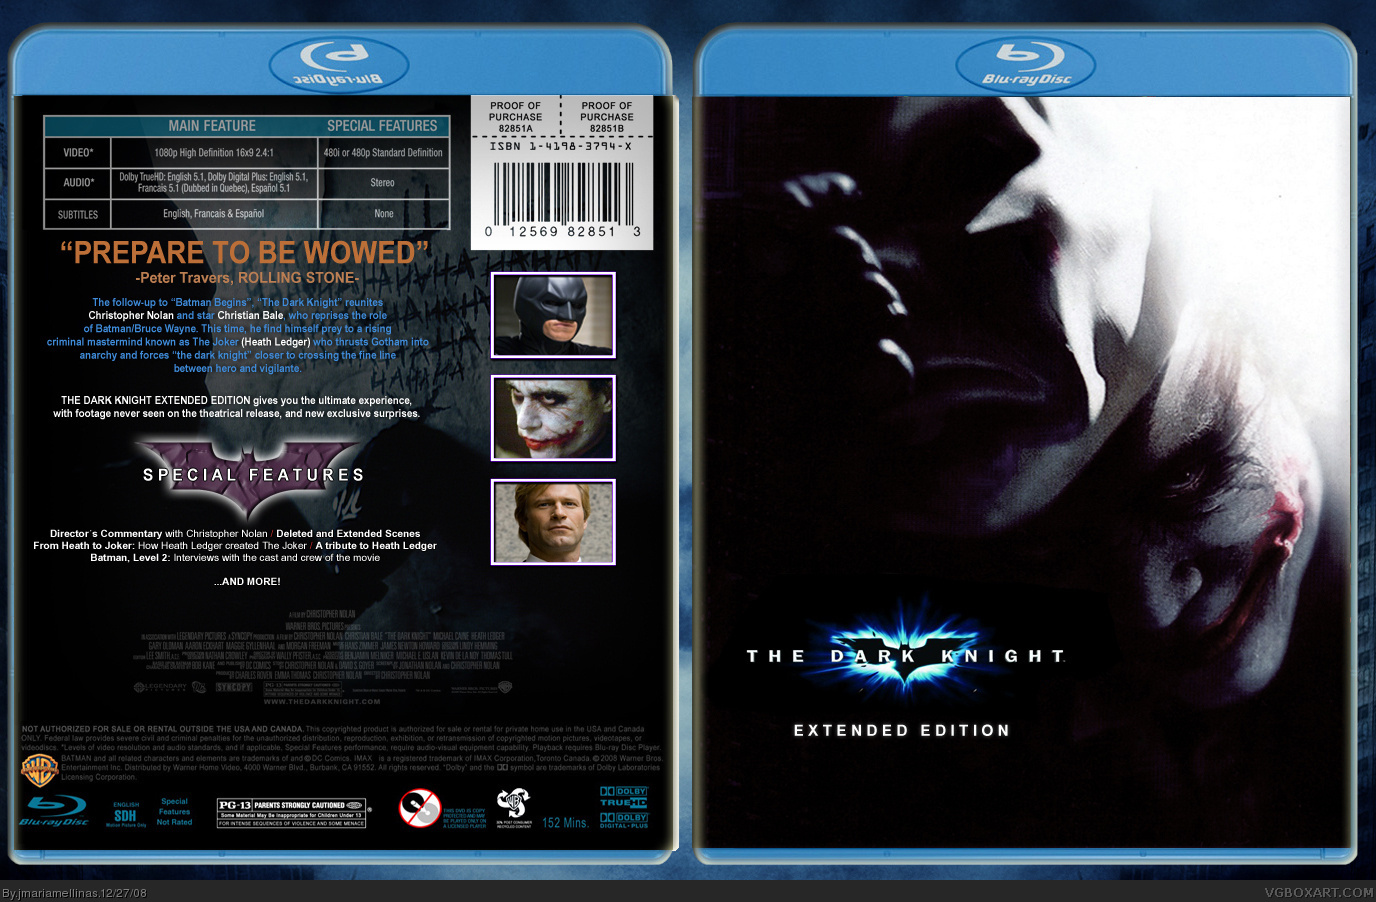 The Dark Knight Extended Edition box cover